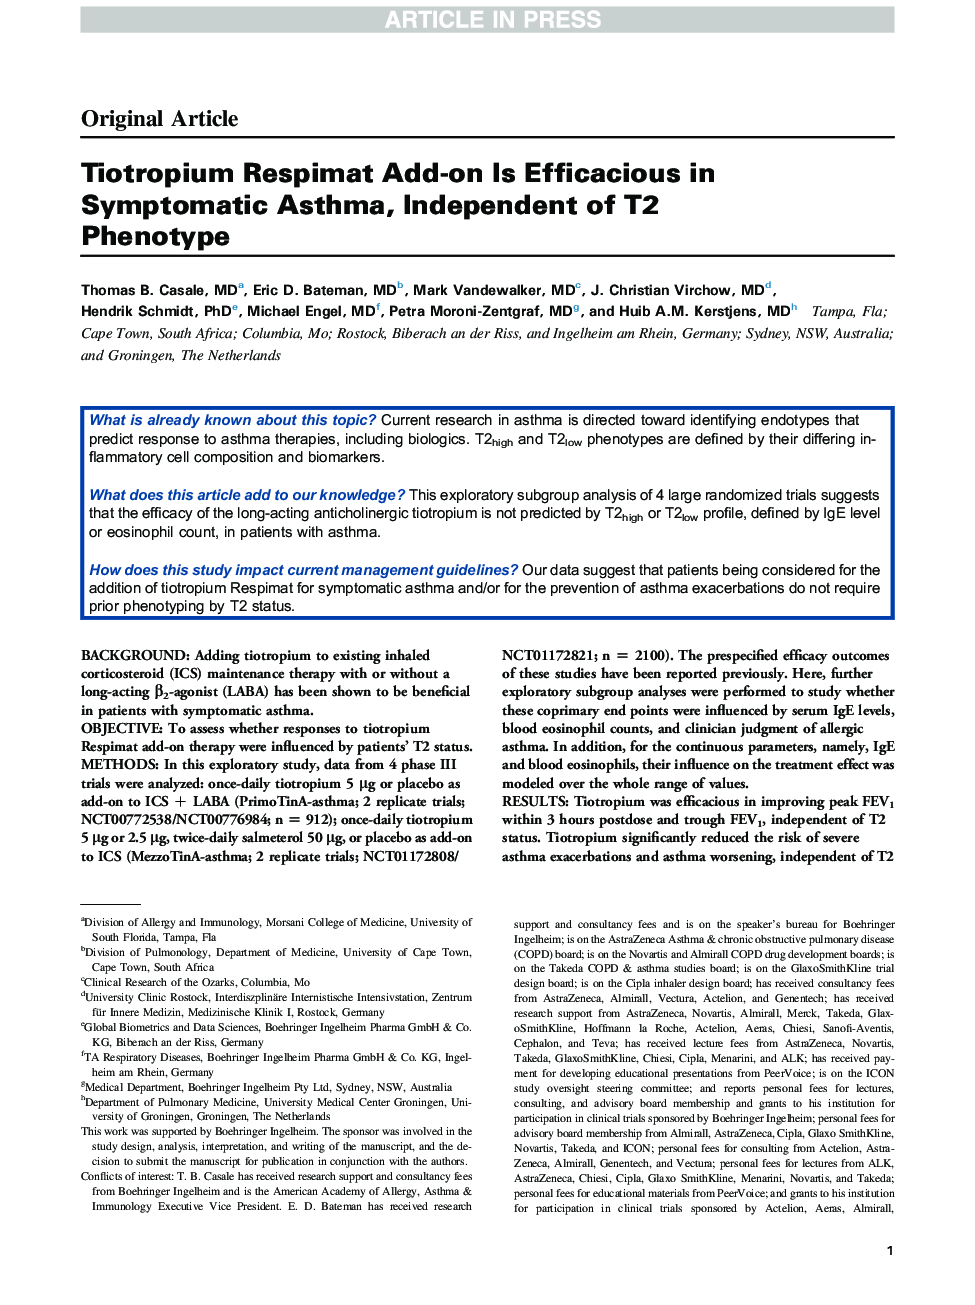 Tiotropium Respimat Add-on Is Efficacious in Symptomatic Asthma, Independent of T2 Phenotype